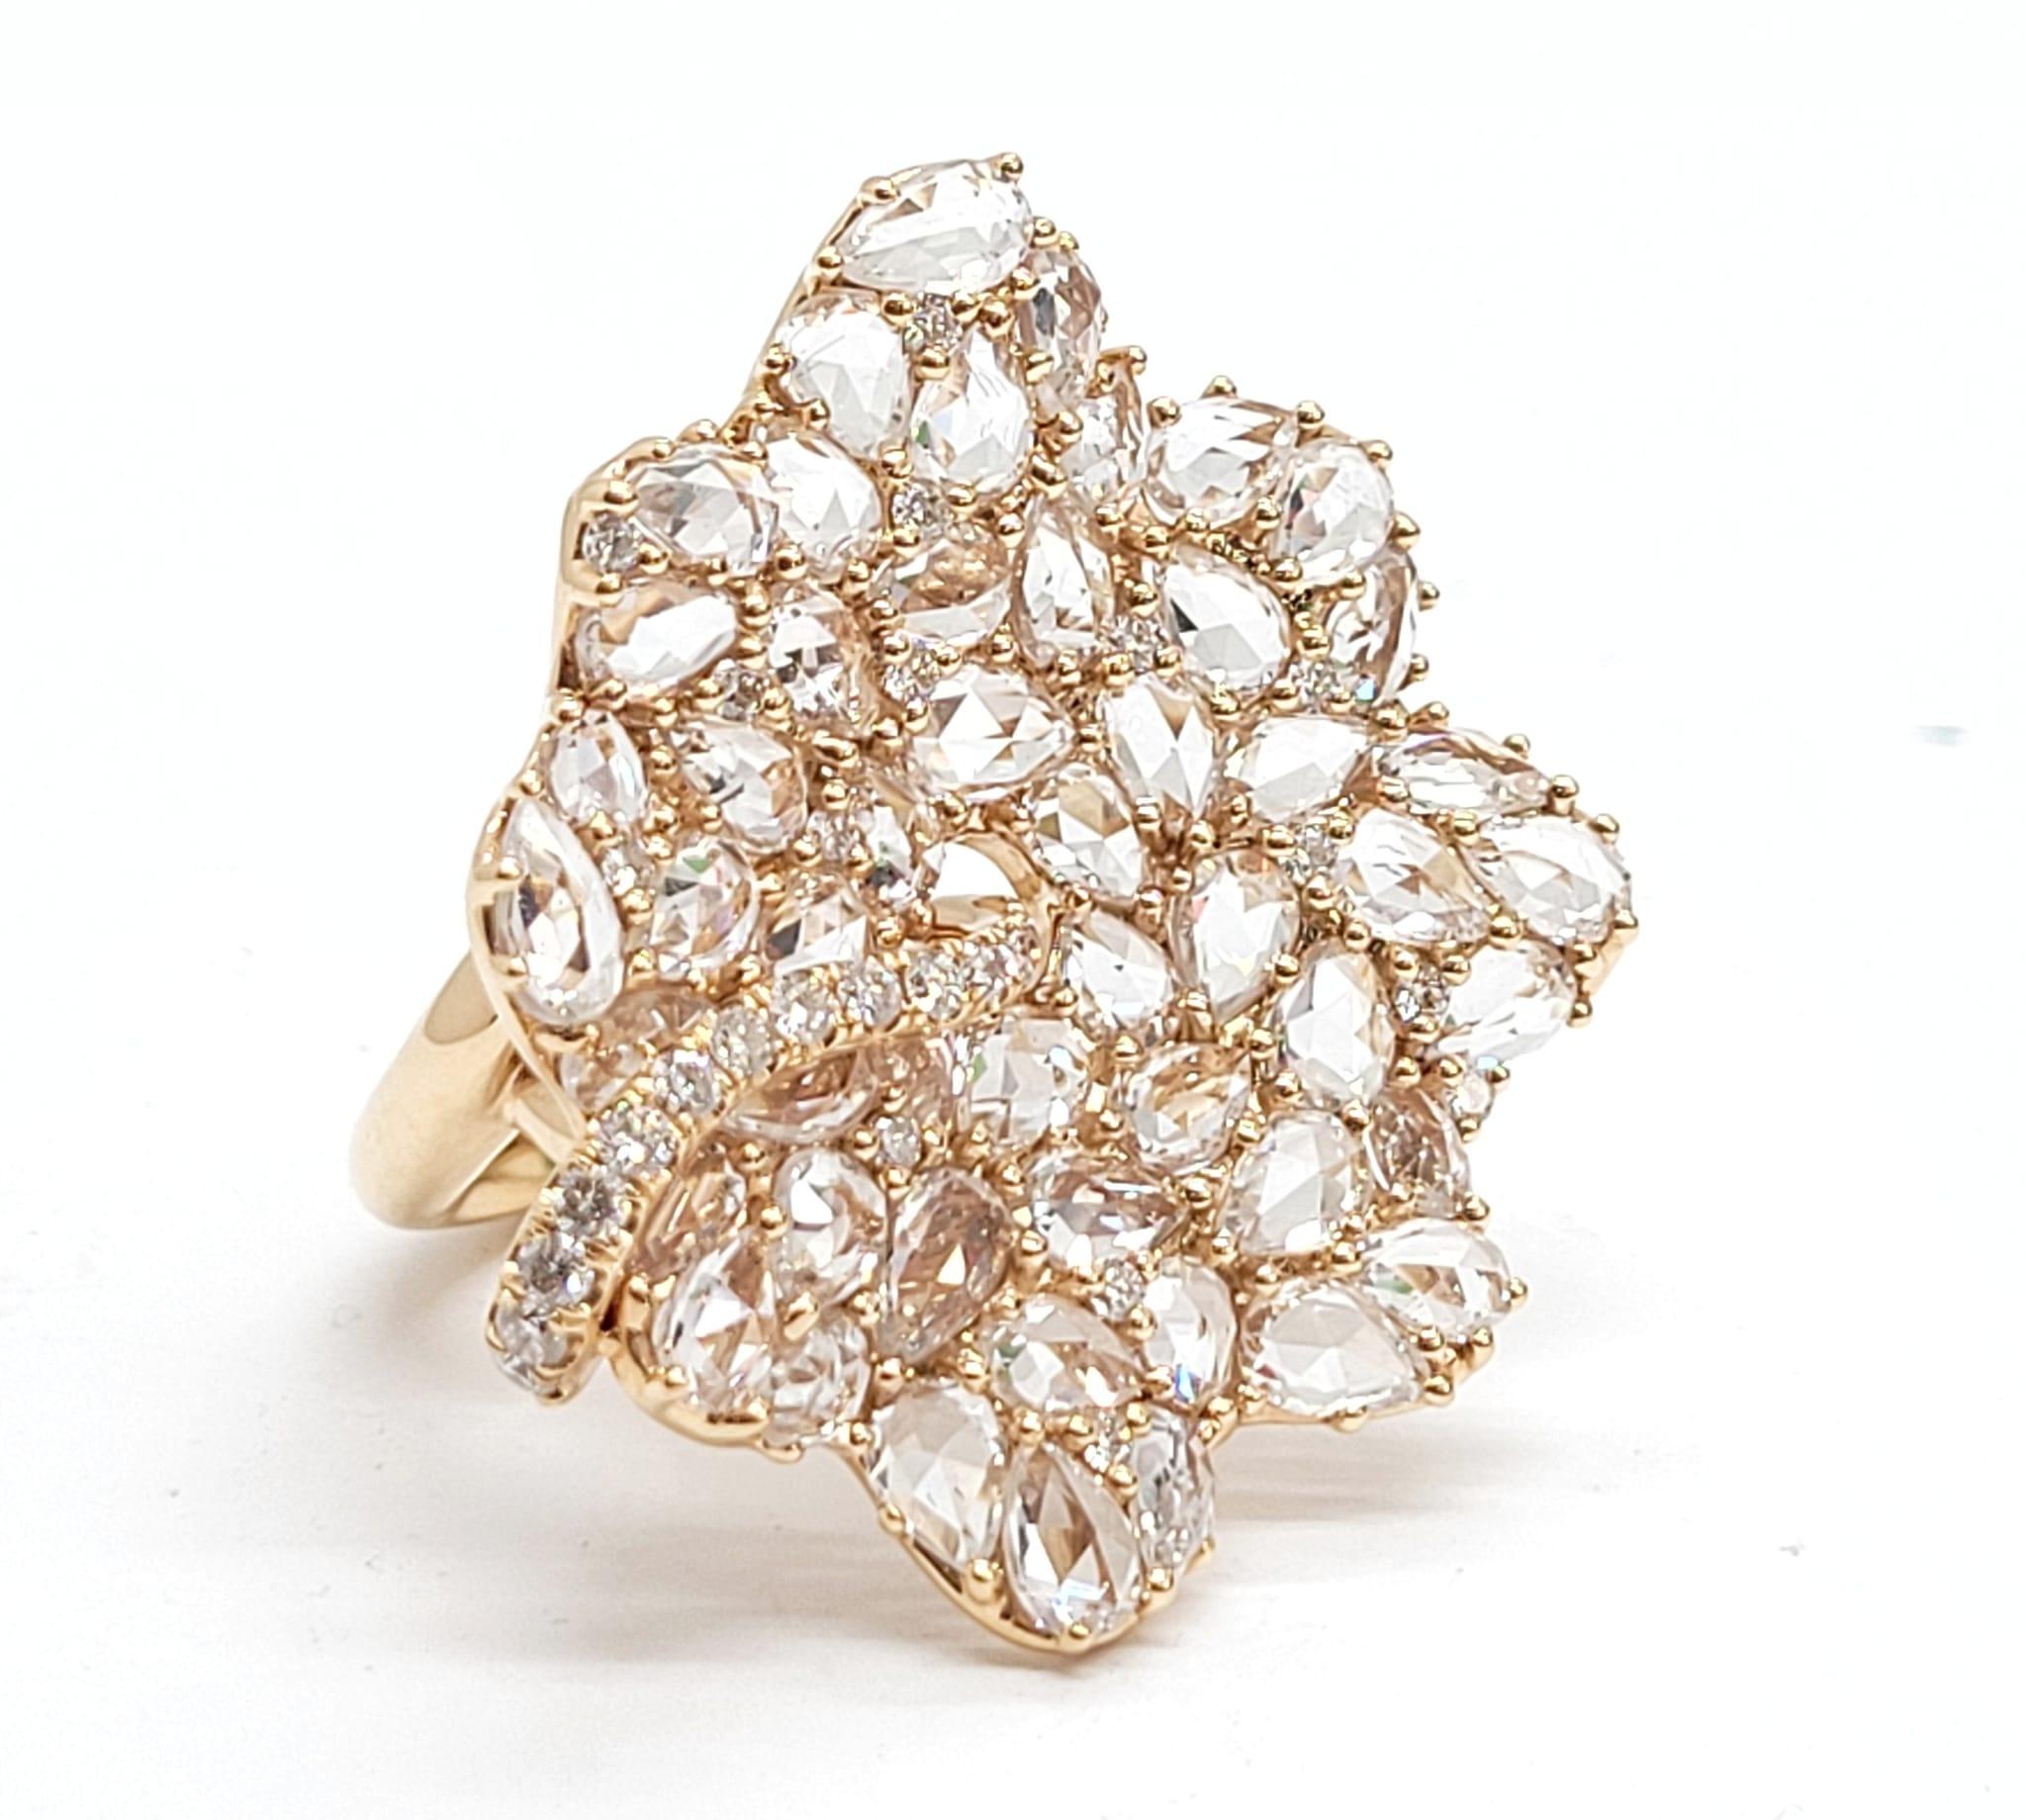 Andreoli Diamond Sapphire 18 Karat Rose Gold Ring

This ring features:
- 0.48 Carat Diamond
- 9.10 Carat White Sapphire
- 16.52 Gram 18K Rose Gold
- Made In Italy